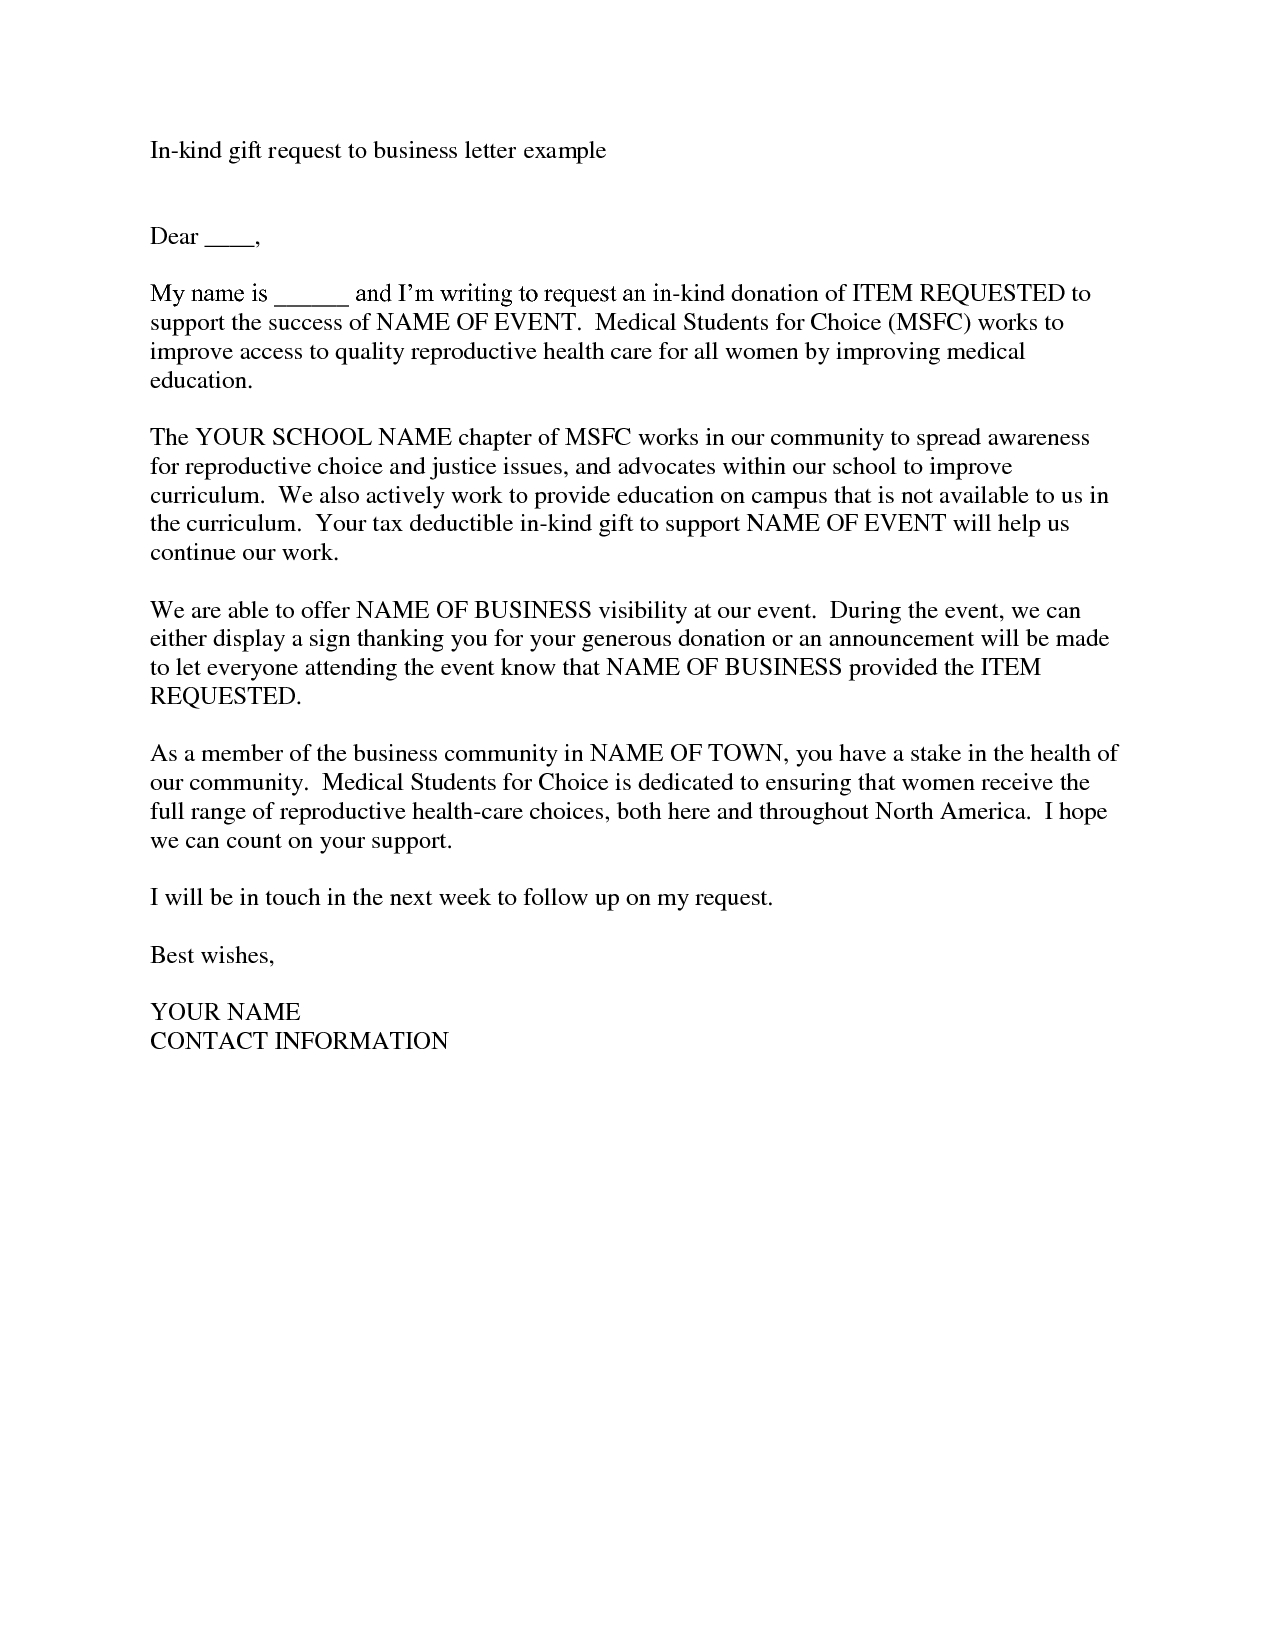 Sample Letter Requesting Financial Assistance from learn.ally360.com